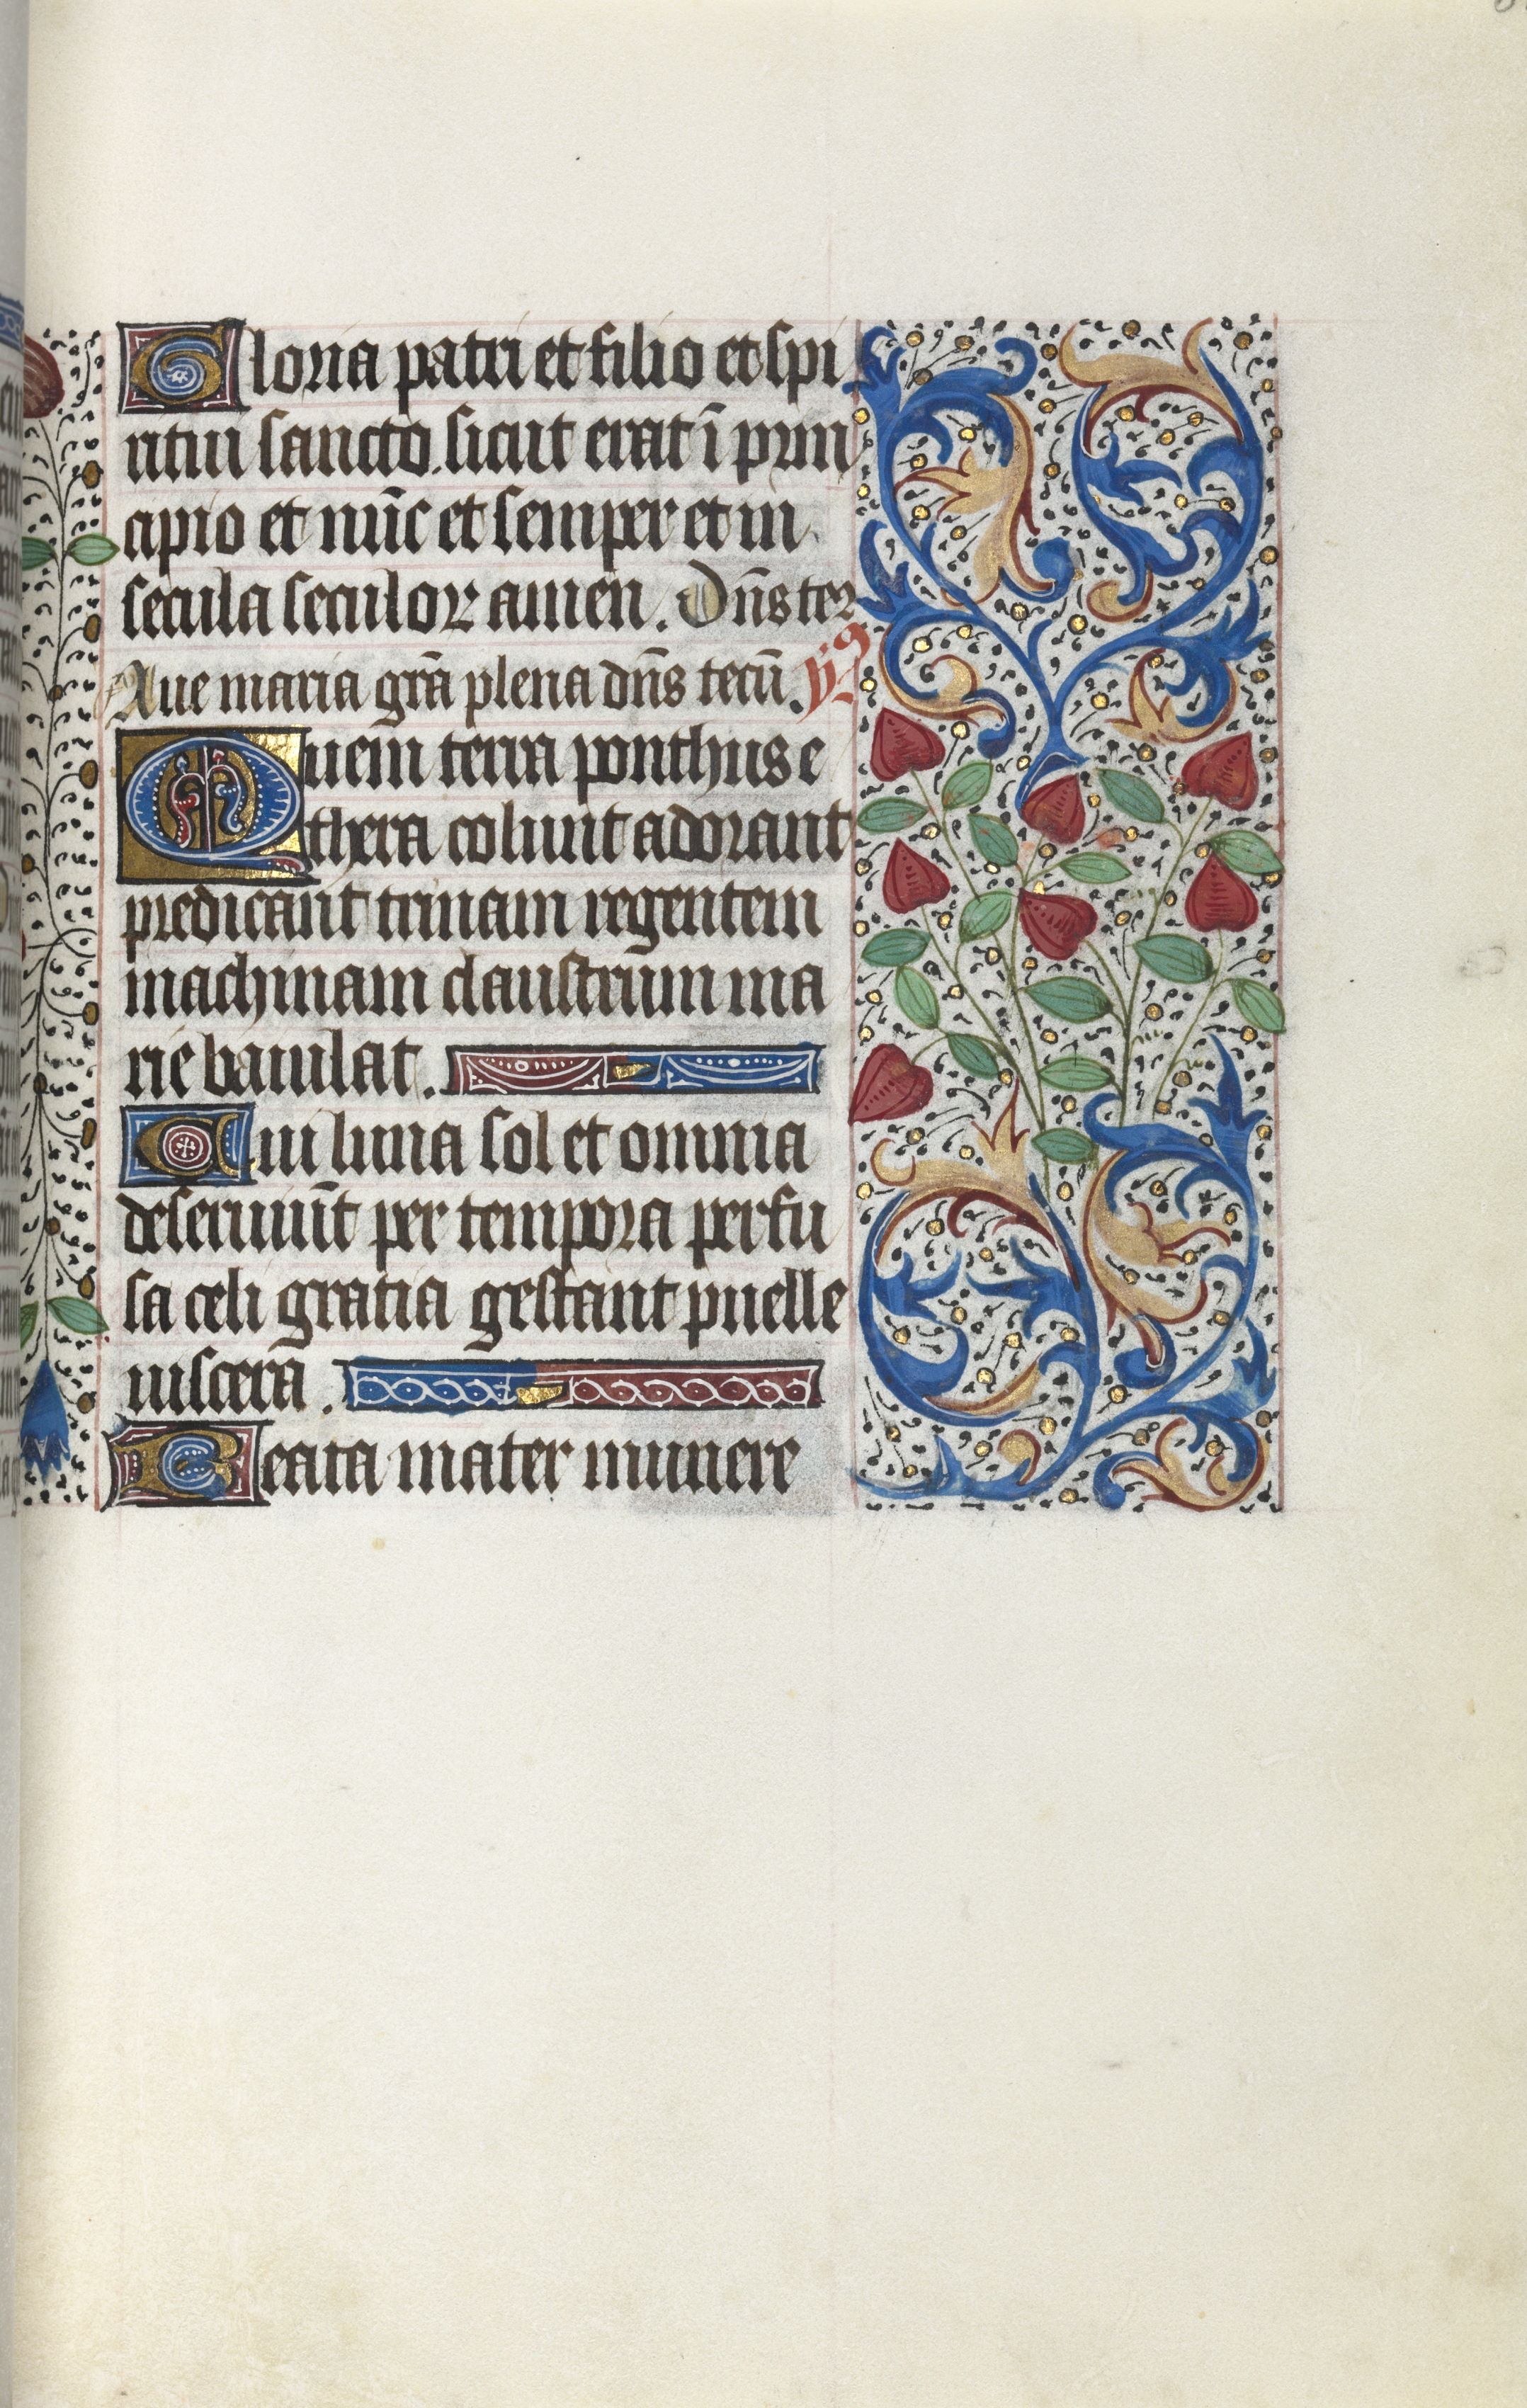 Book of Hours (Use of Rouen): fol. 30r